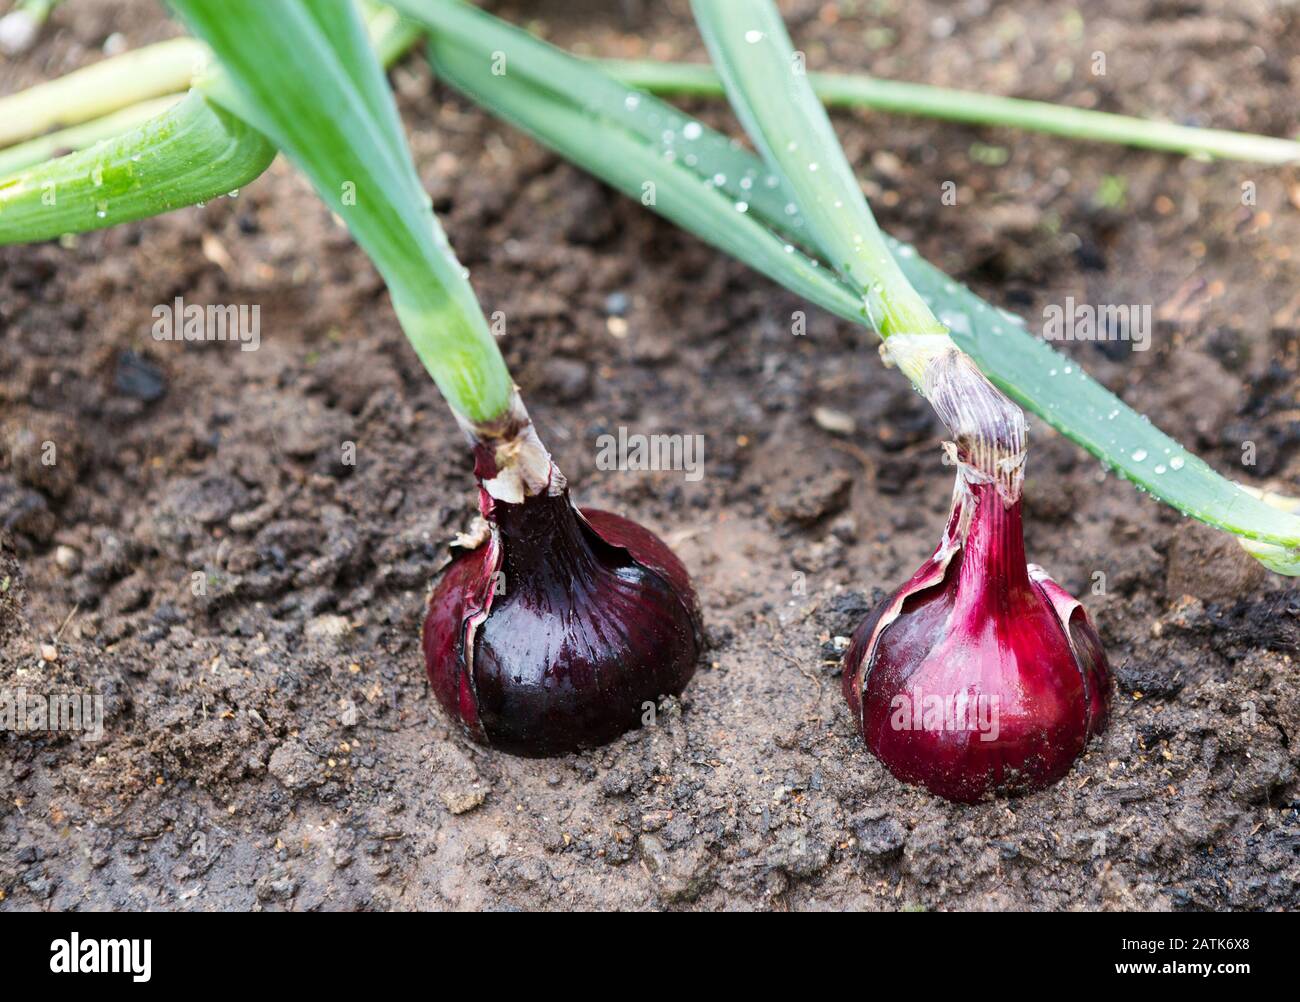 Onion plantation in the vegetable garden. Onion growing close-up. Onions growing in rows on a field Stock Photo